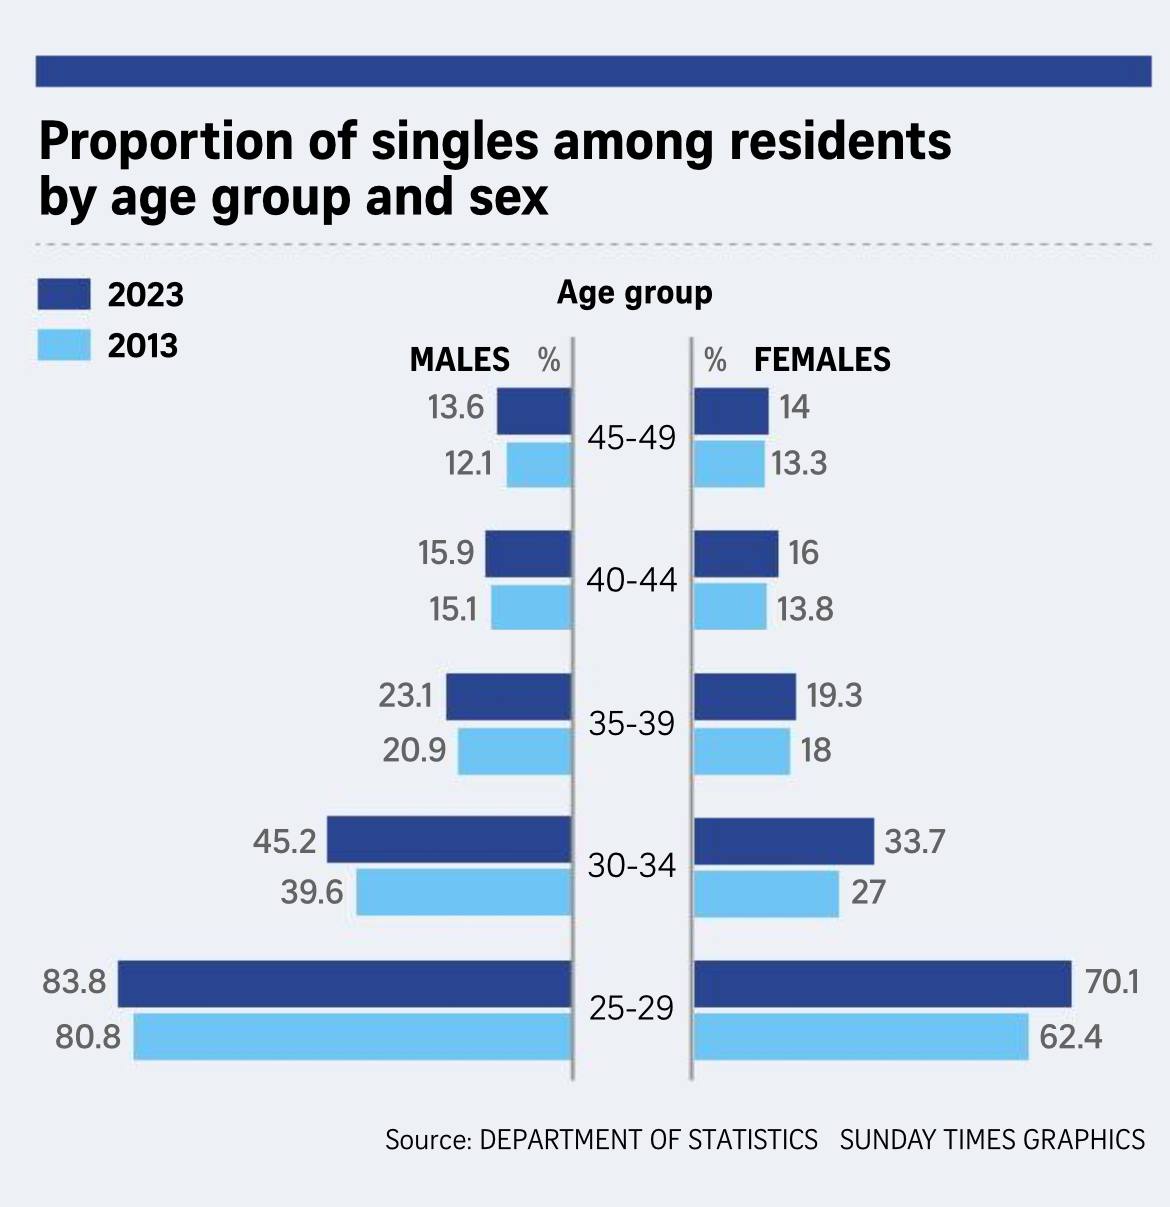 Proportion of Singles among Residents by age group and sex